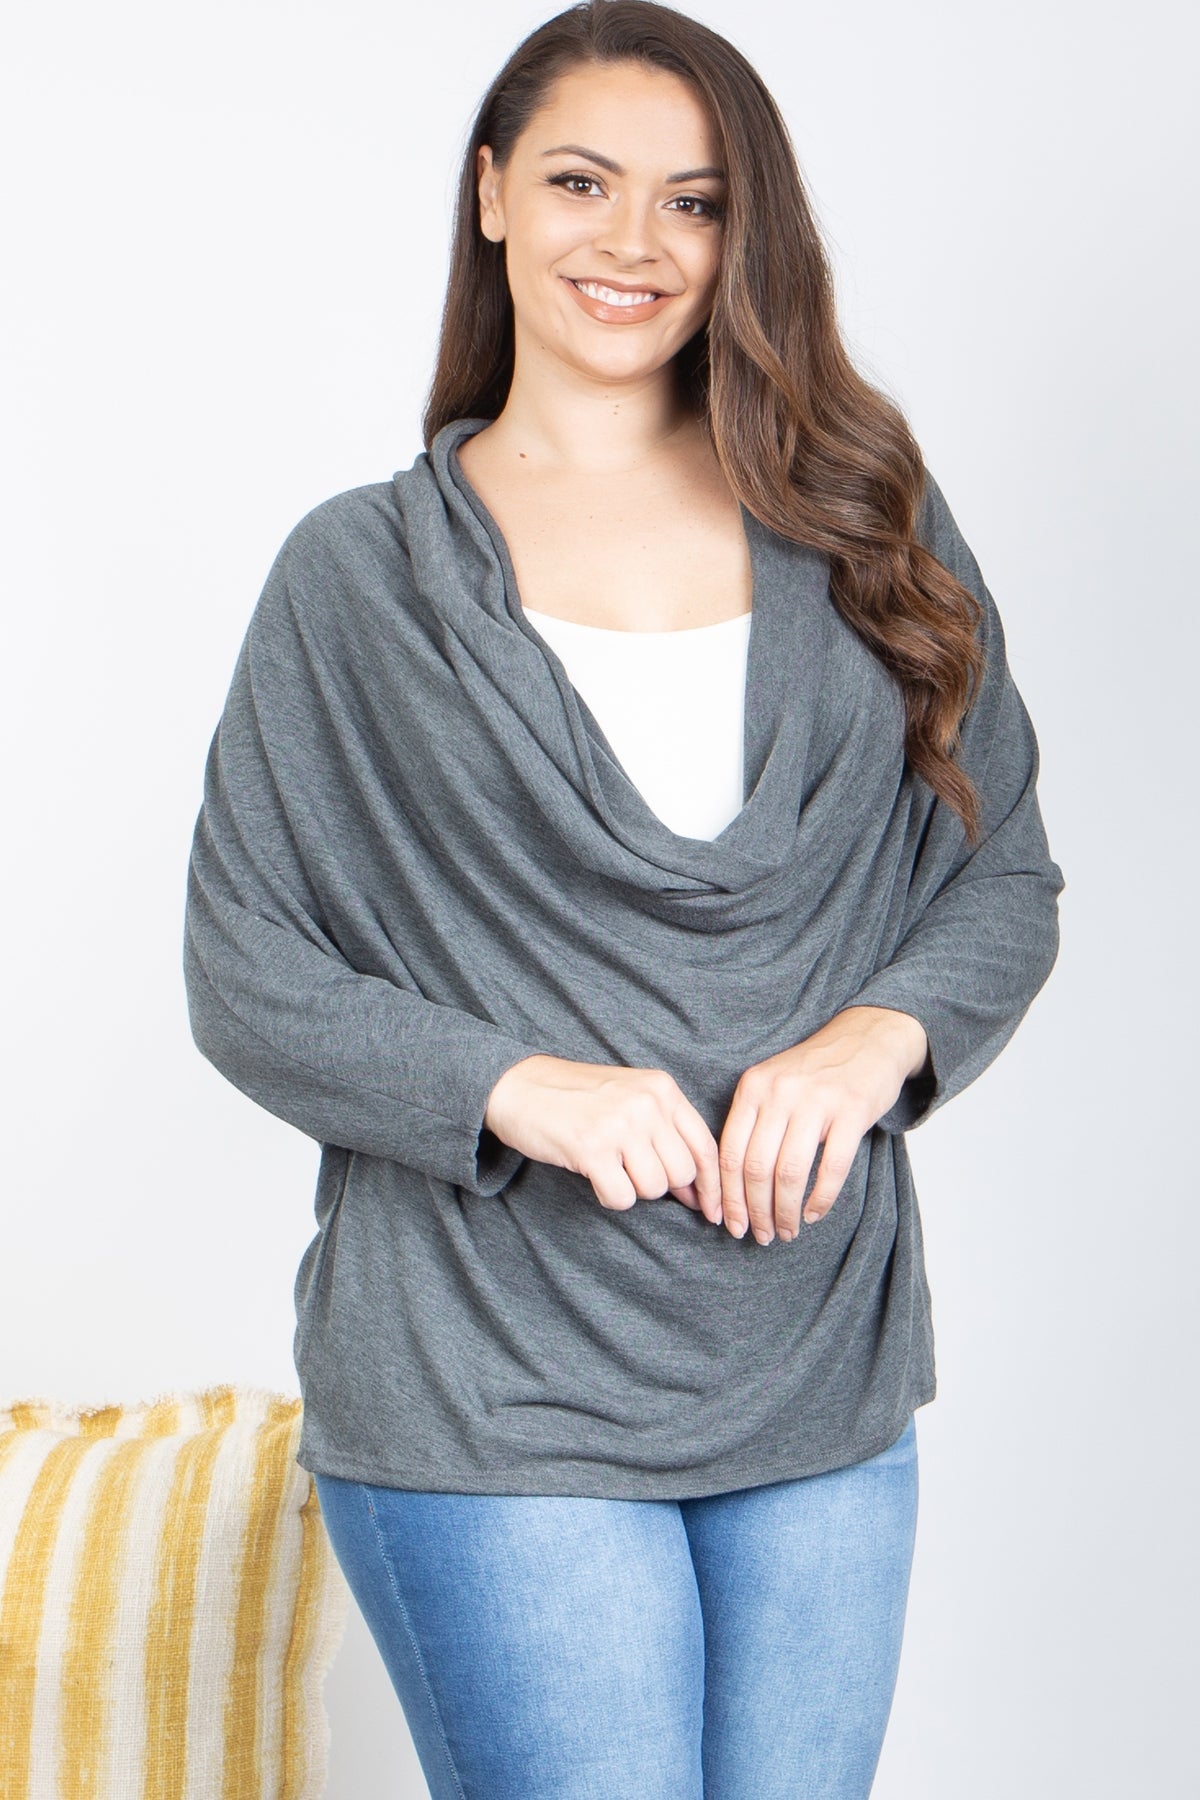 CHARCOAL#2 PLUS SIZE COWL NECKLINE DOLMAN SLEEVE TOP 2-2-2 (NOW $ 3.00 ONLY!)